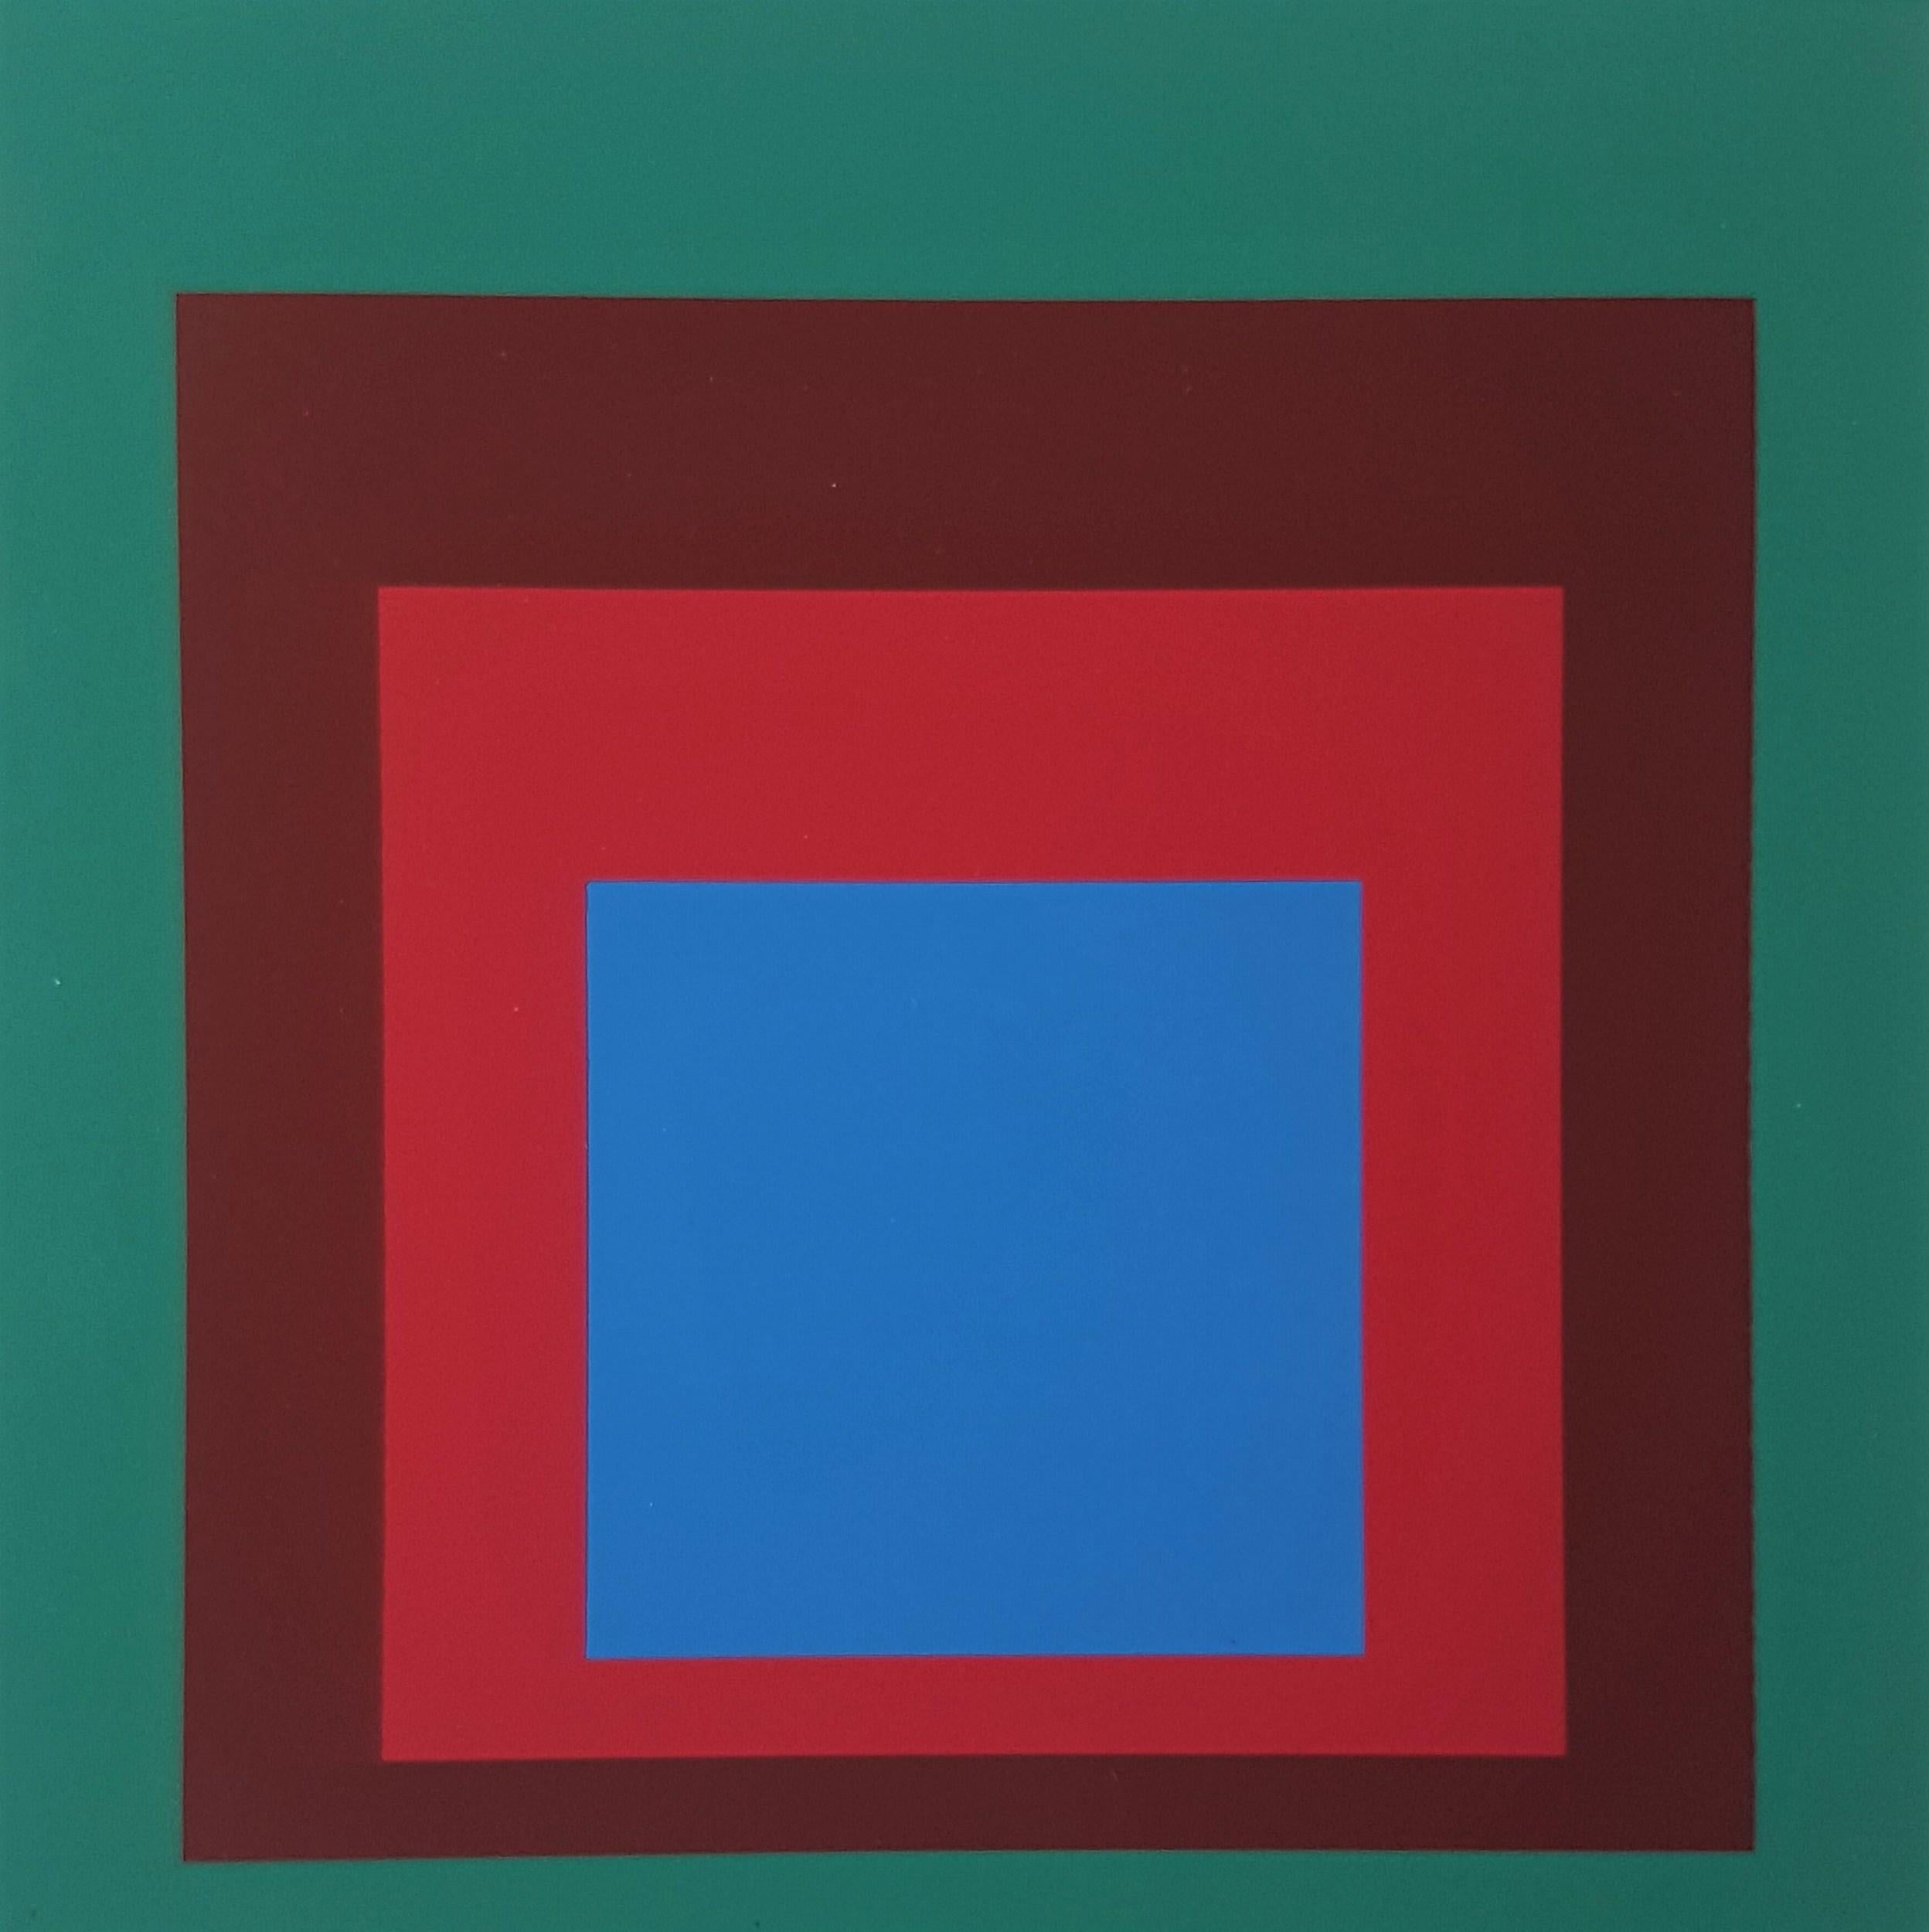 Homage to the Square: Protected Blue (~28% OFF LIST PRICE - LIMITED TIME ONLY) - Print by (after) Josef Albers